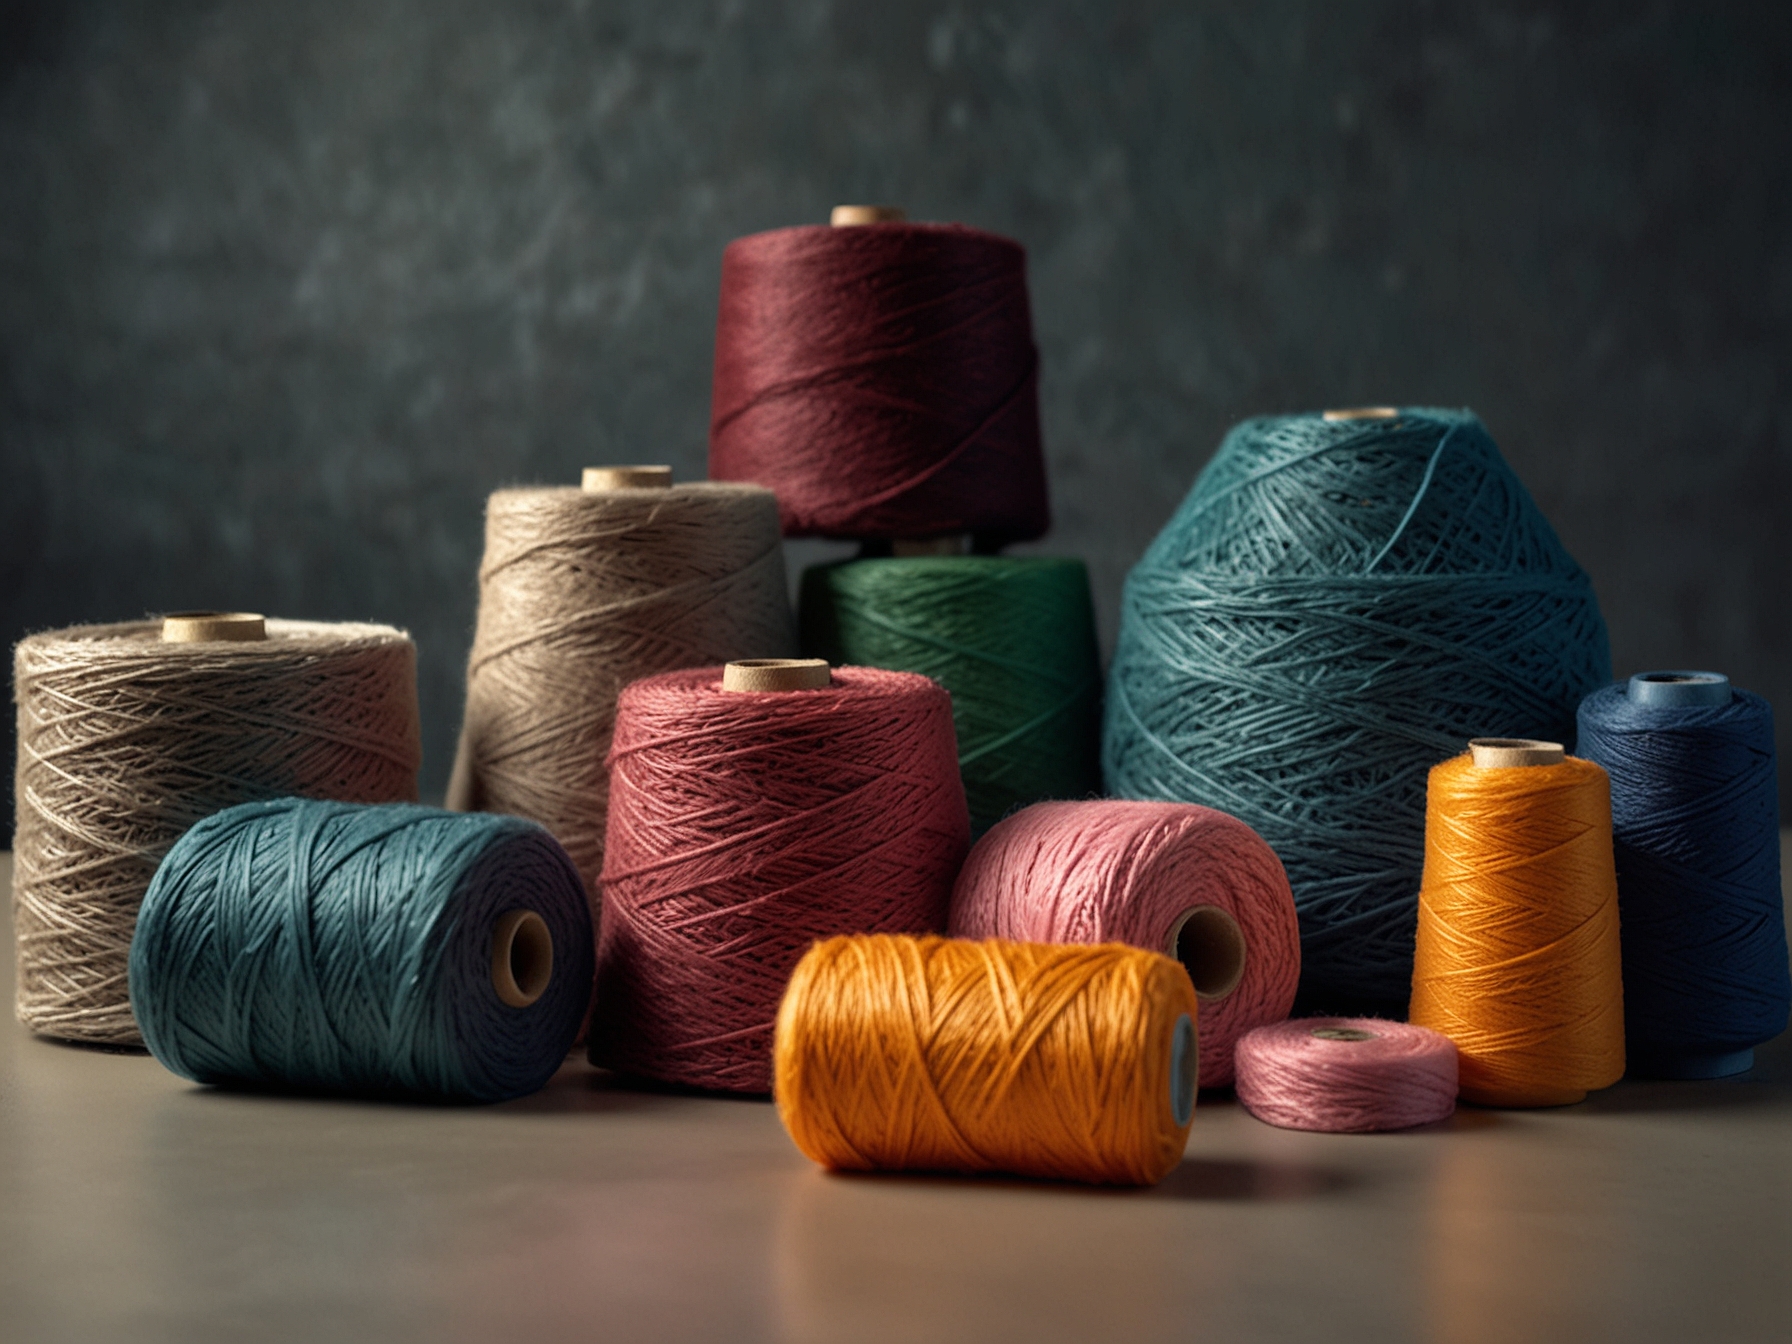 An illustration showing the rising trend in the global synthetic yarn market, with percentages indicating its growth from USD 234.1 billion in 2024 to USD 300.5 billion by 2029.